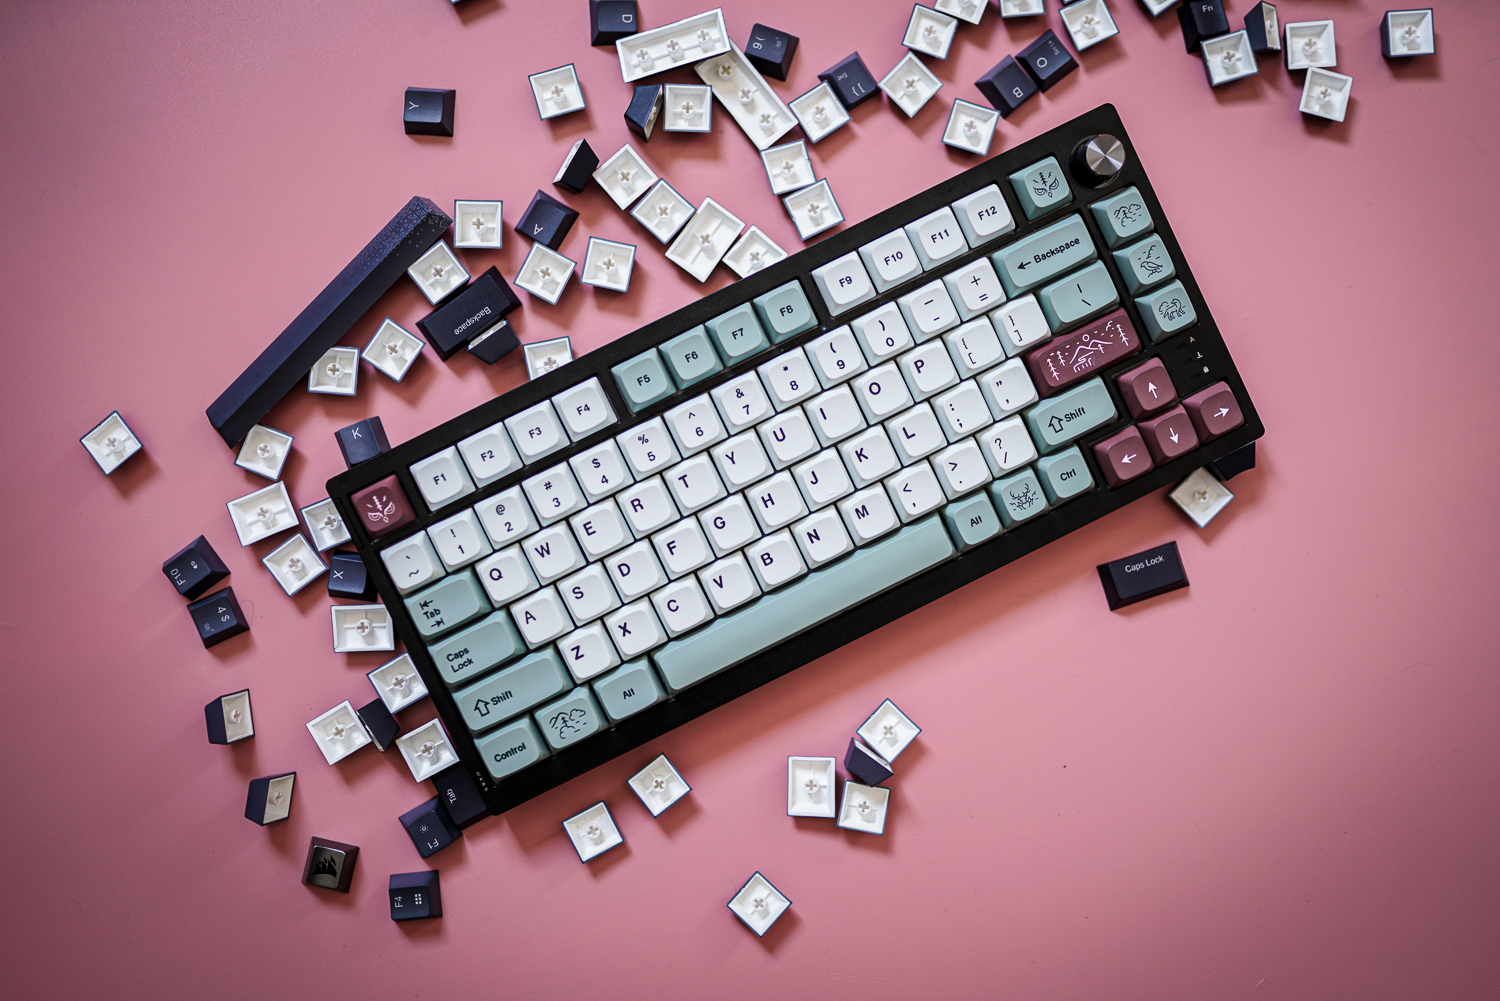 The Corsair K65 Plus Wireless with a new set of keycaps.